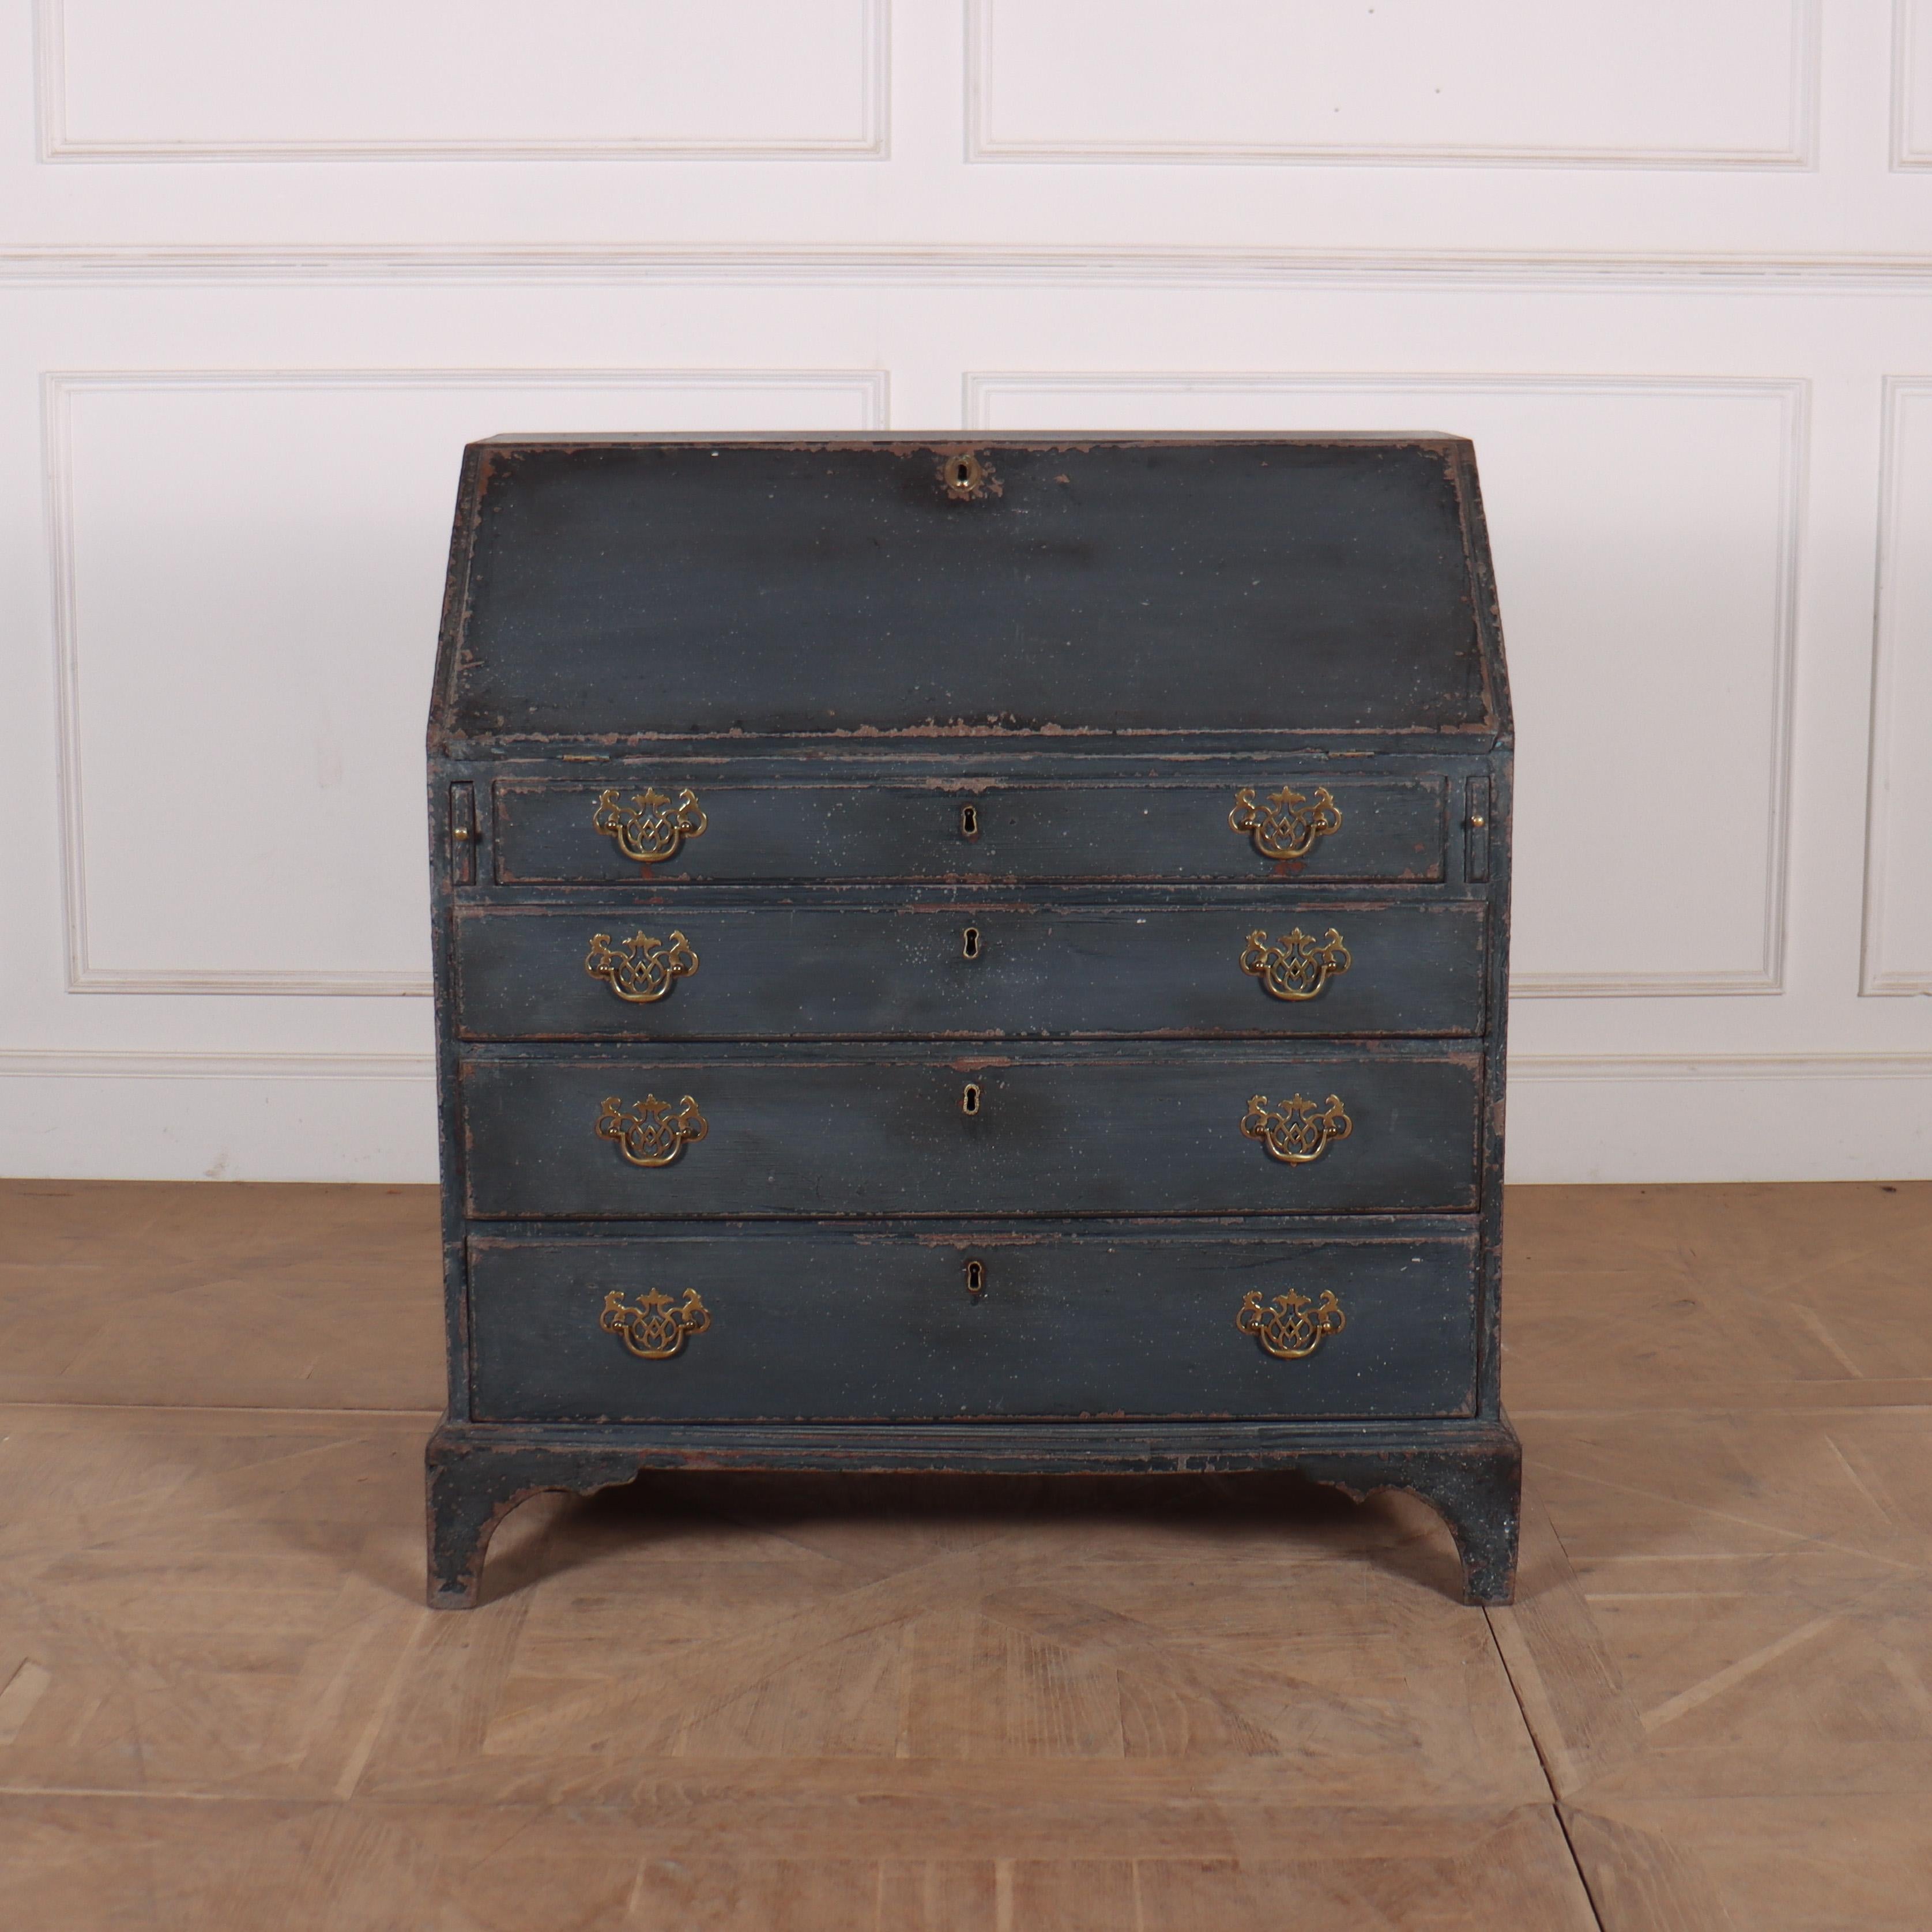 Late 18th century English painted oak bureau with fitted interior. 1790.

Height to desk is 29